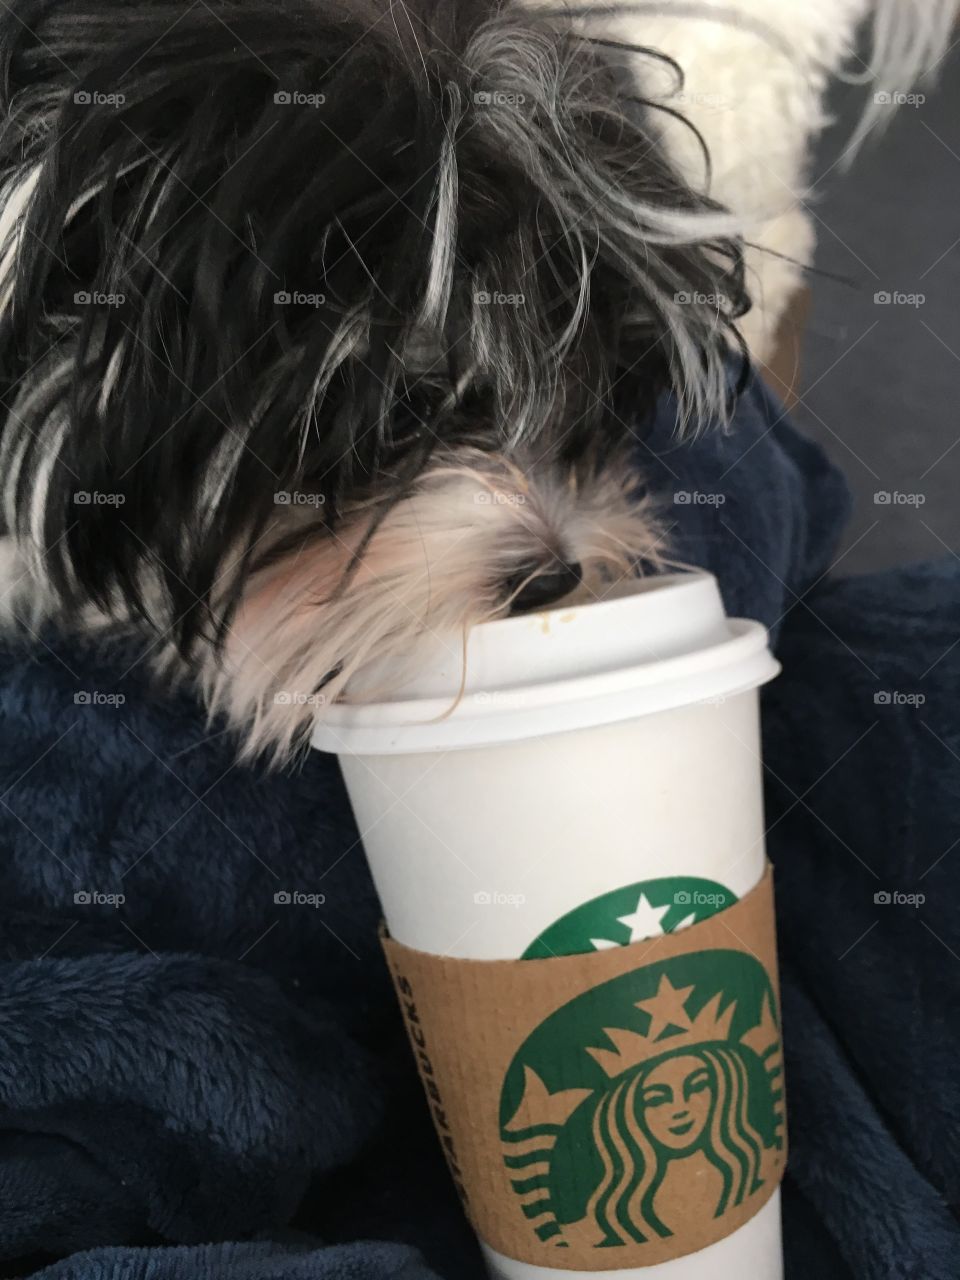 An adorable, shaggy dog trying to drink out of a Starbucks cup 